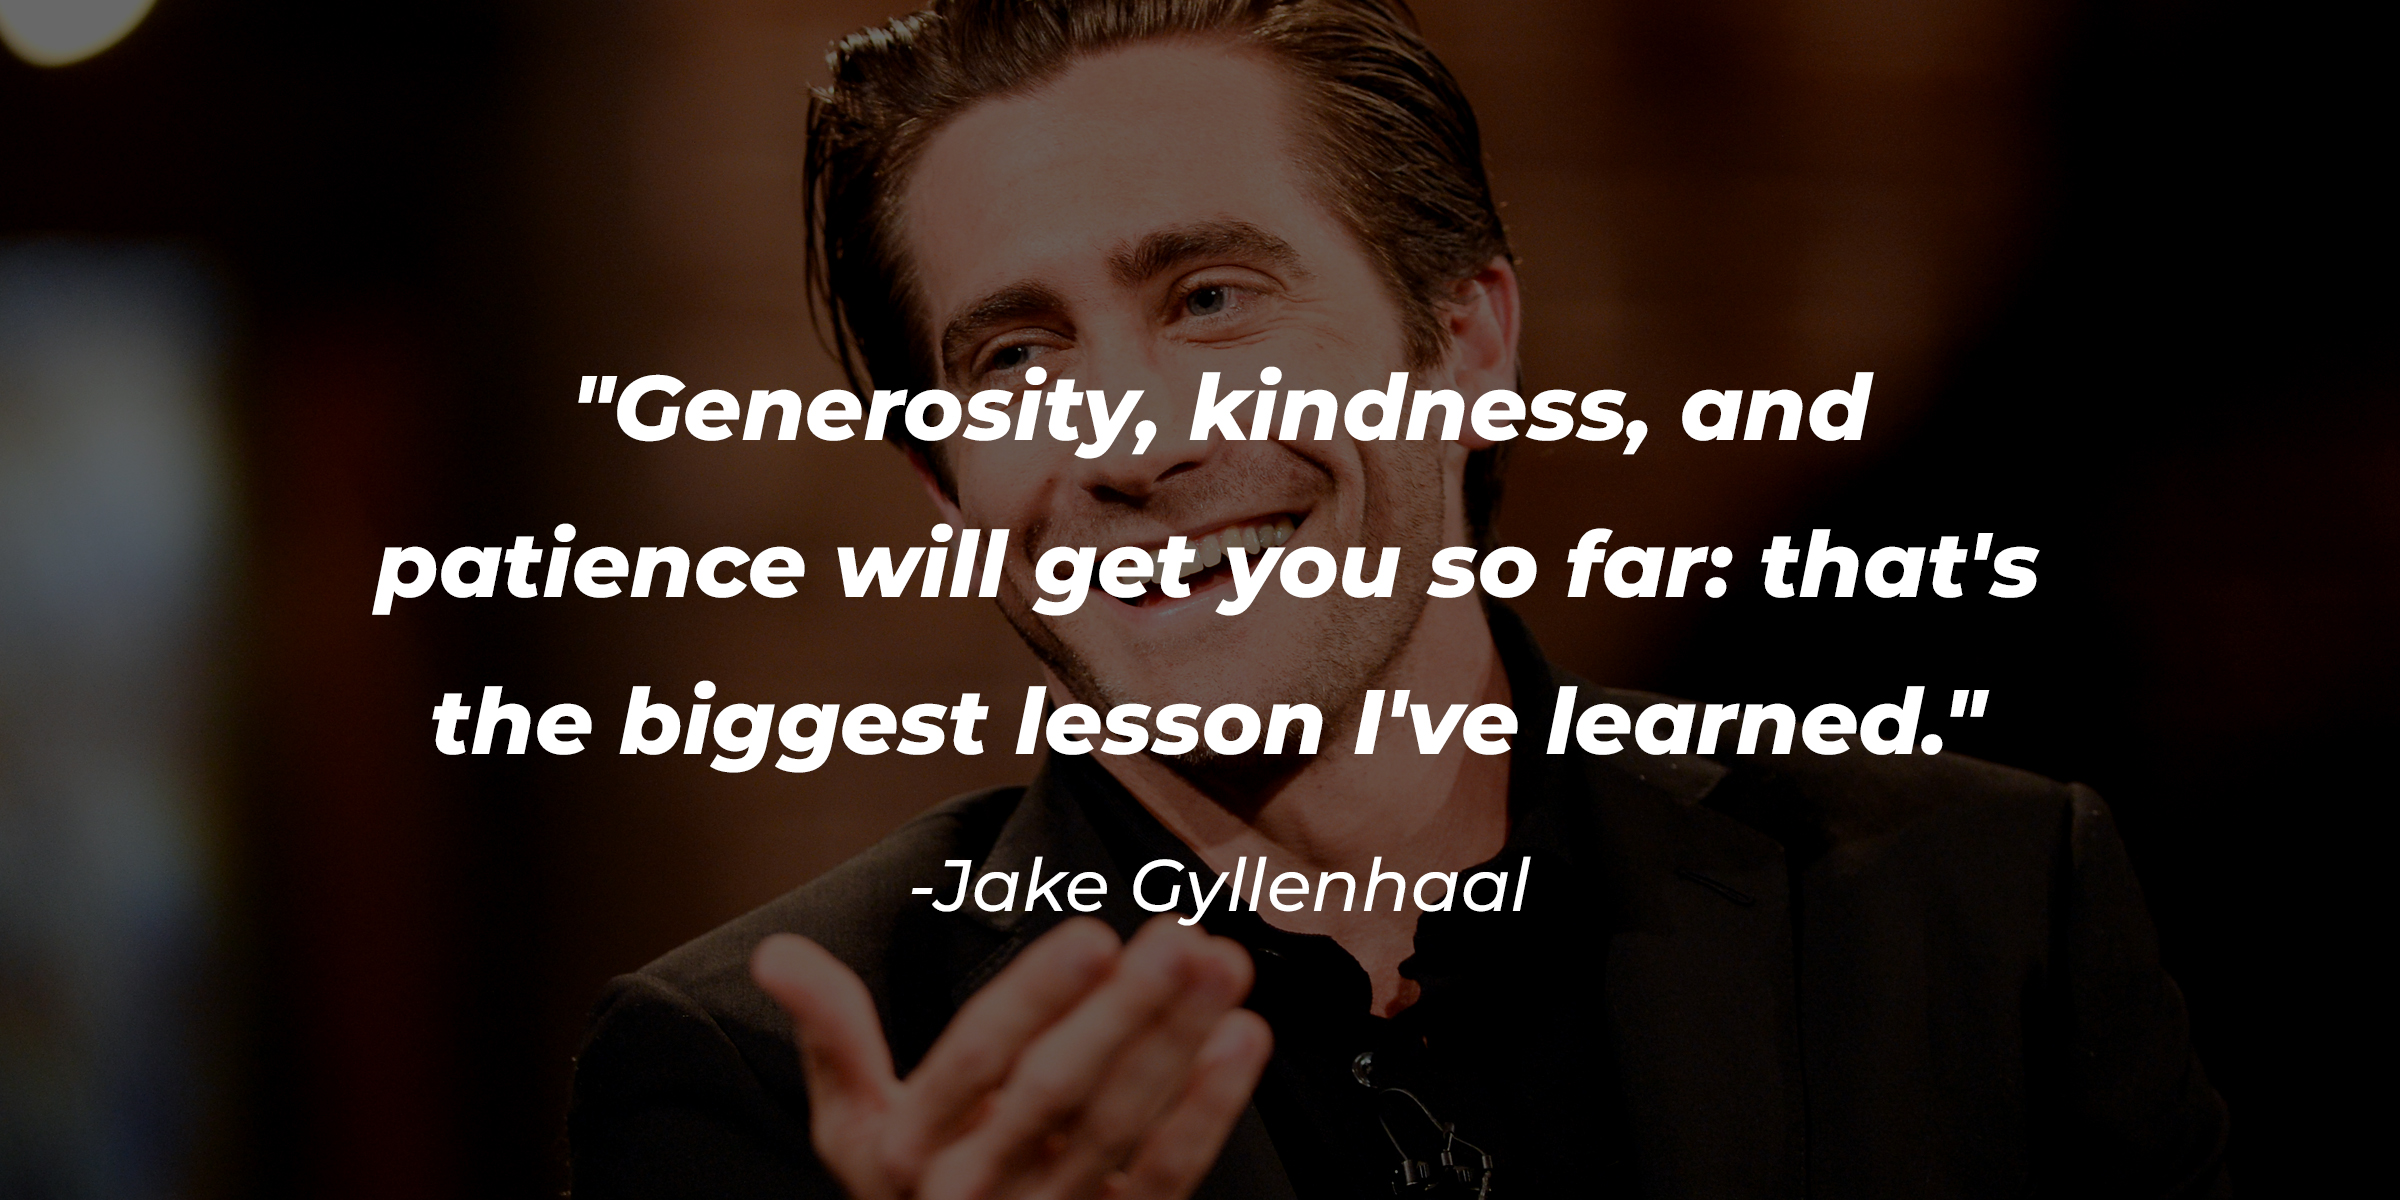 A photo of Jake Gyllenhaal with the quote: "Generosity, kindness, and patience will get you so far: that's the biggest lesson I've learned." | Source: Getty Images